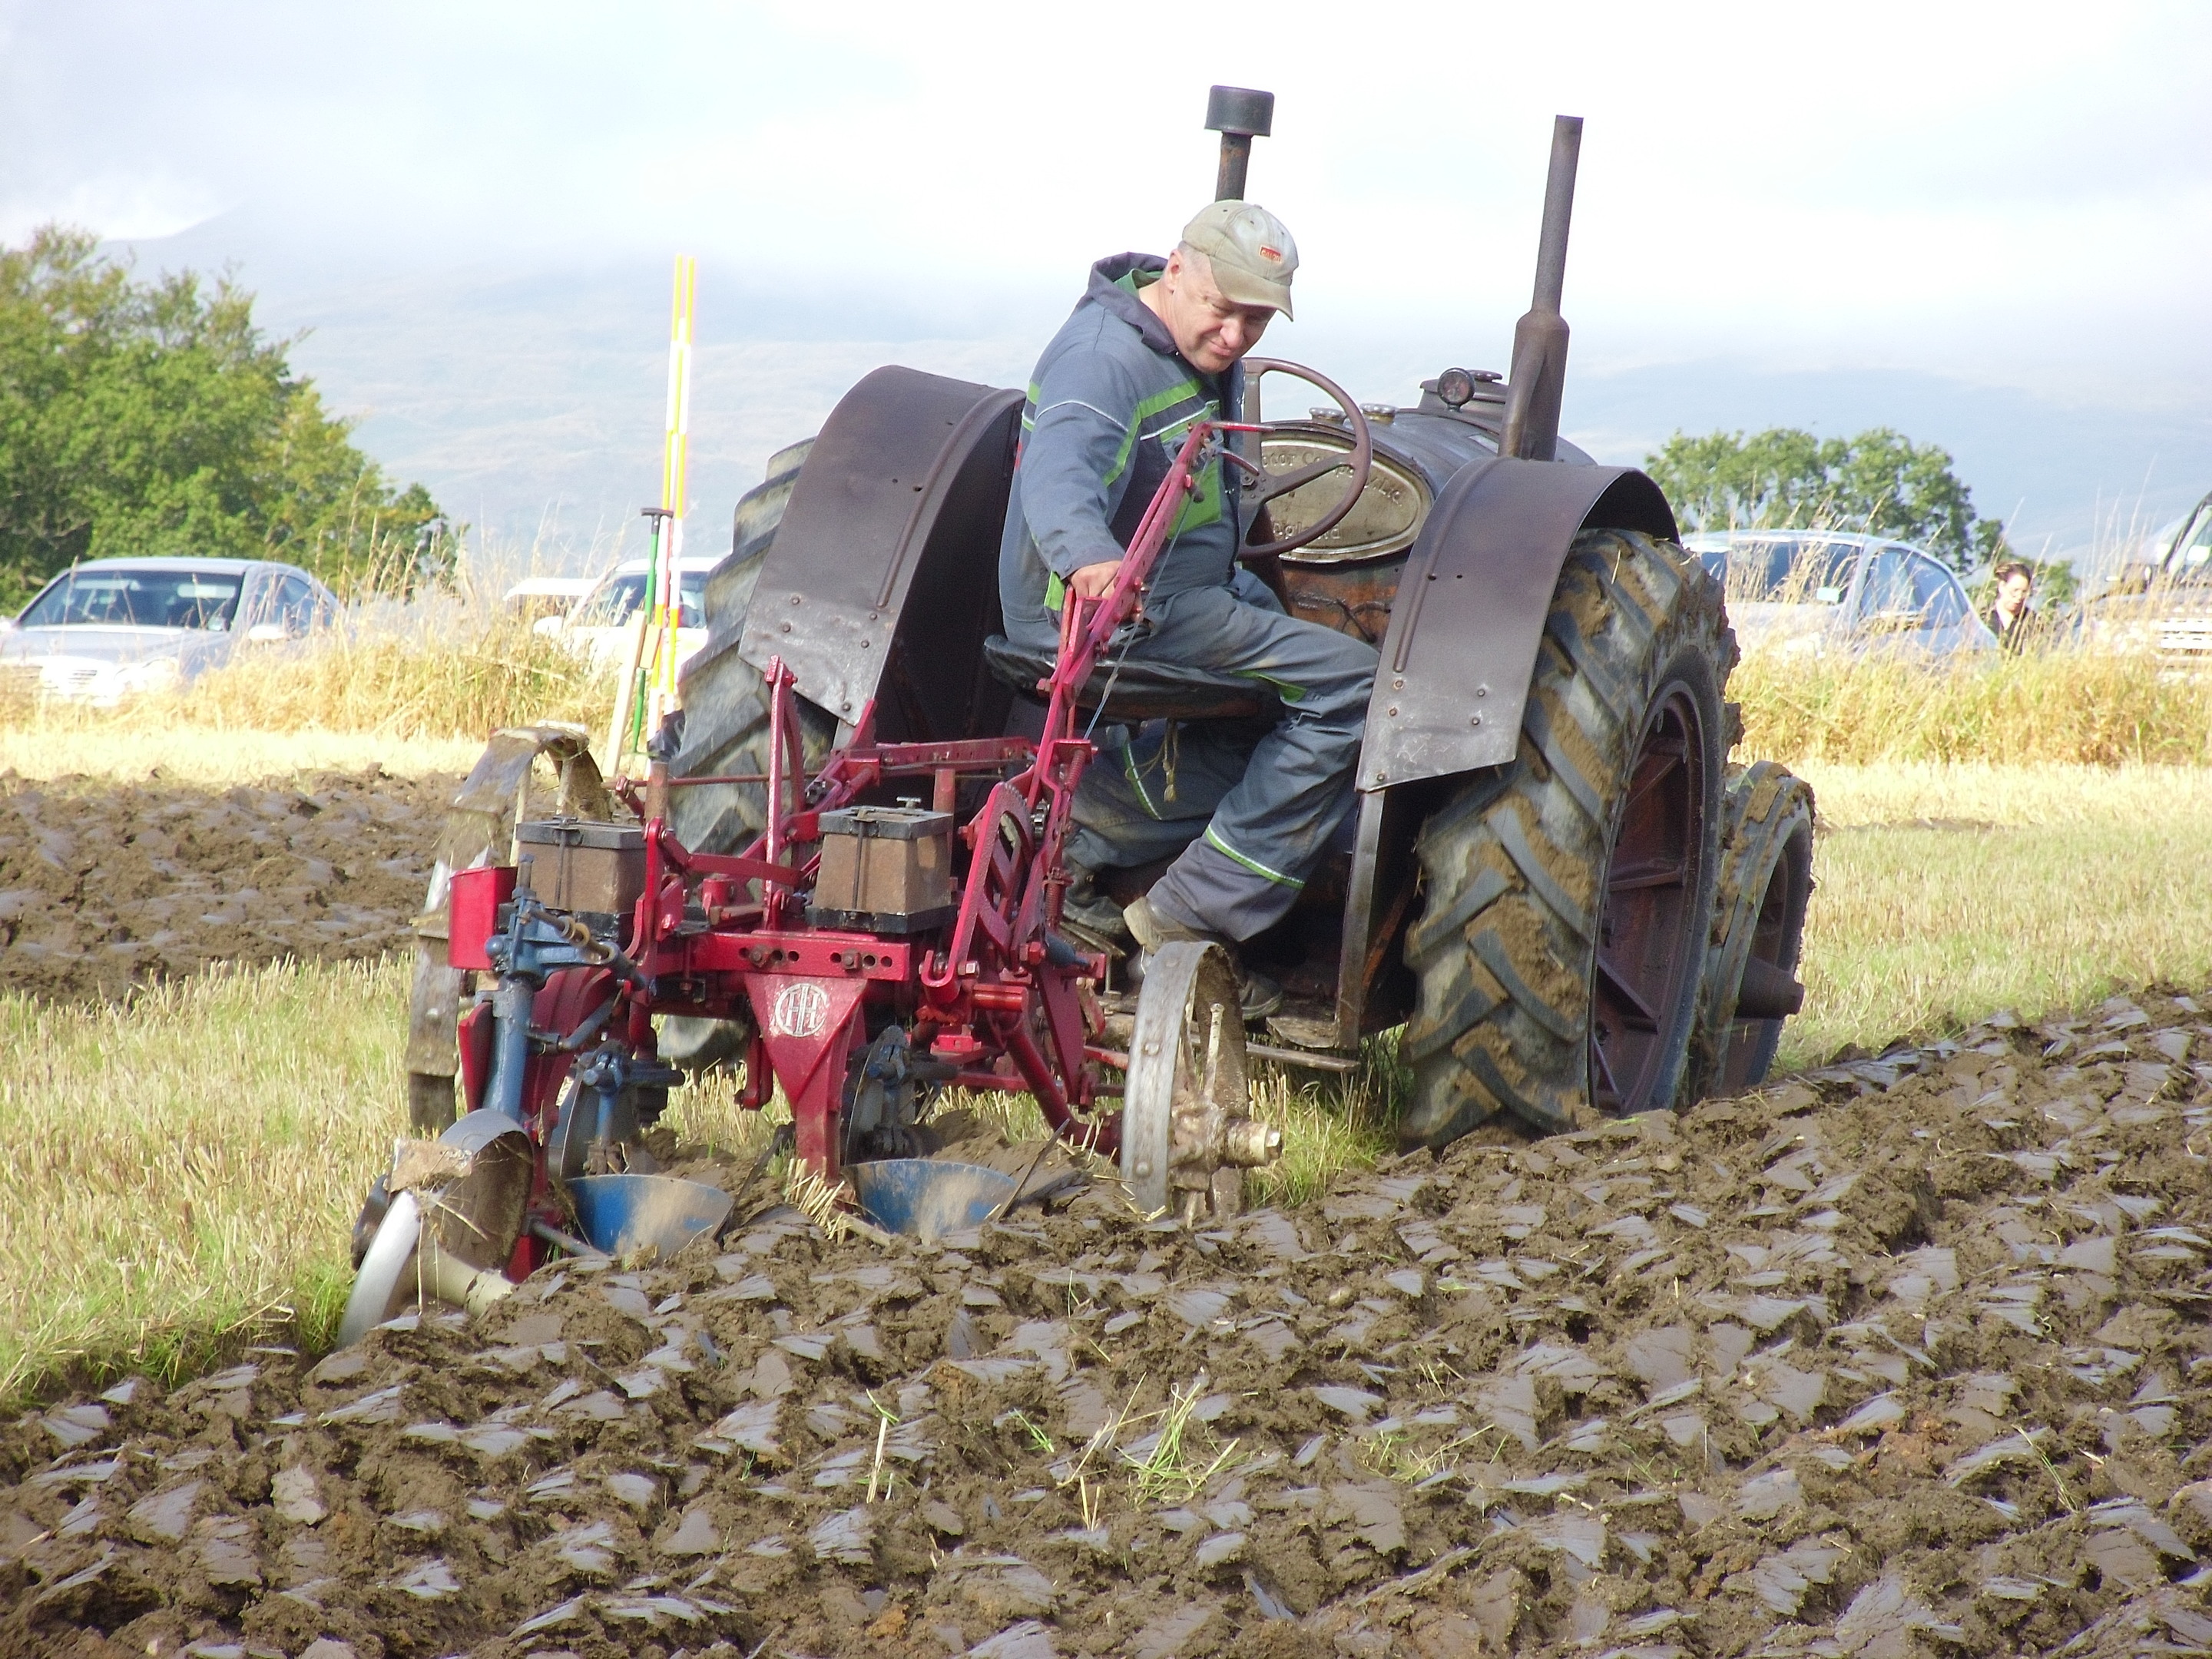 Modern, vintage and horse ploughing will all be on display